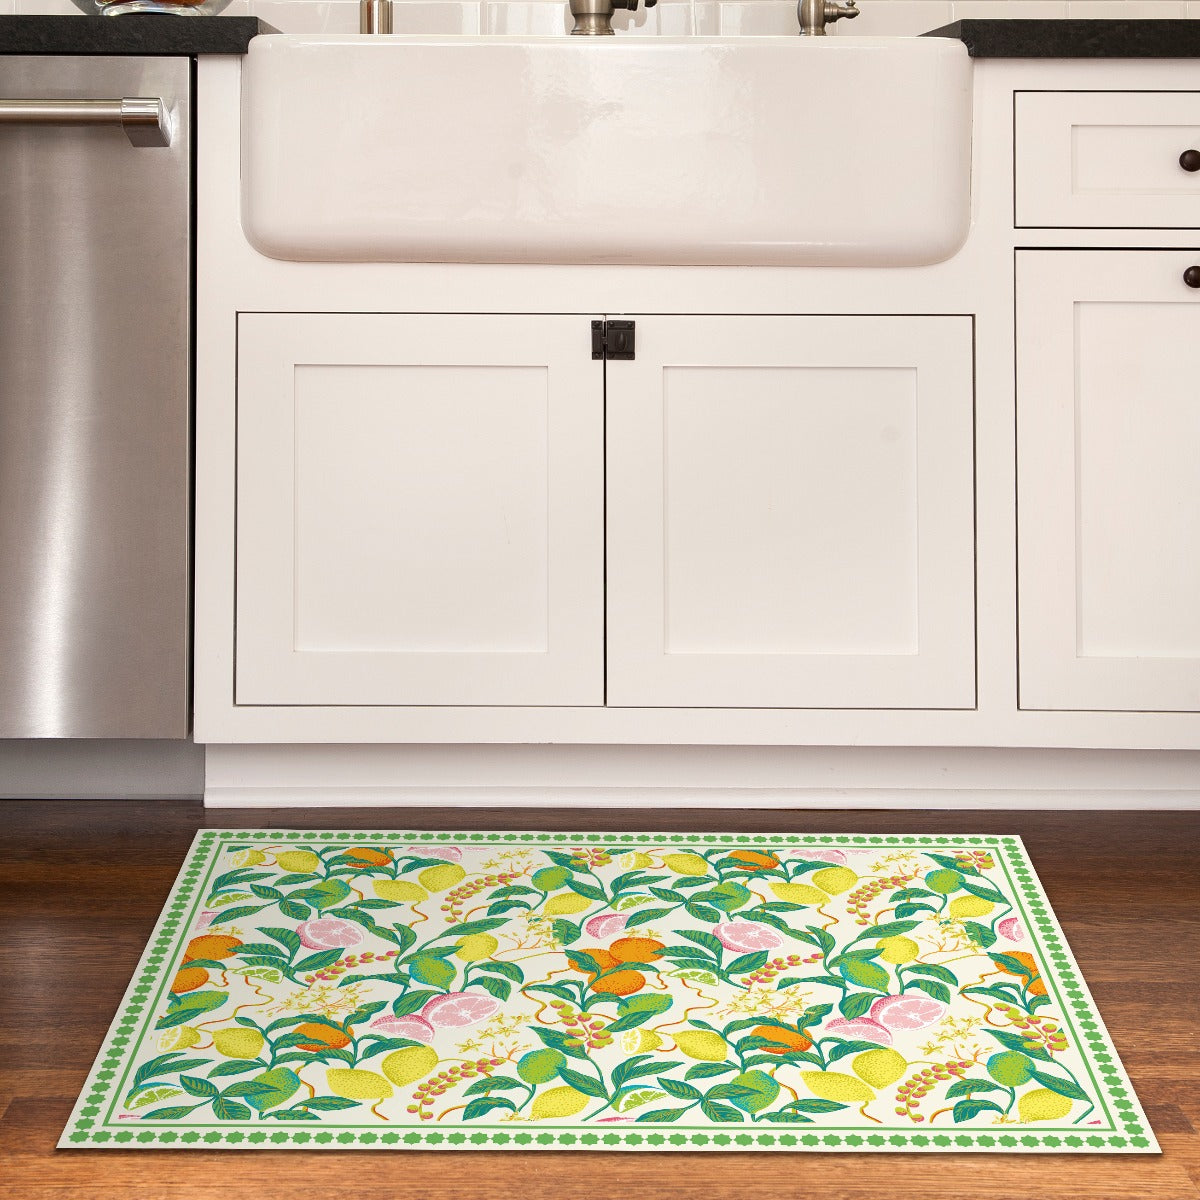 Tempaper's Citrus Vinyl Rug shown in a kitchen in front of a sink.#color_green-citrus